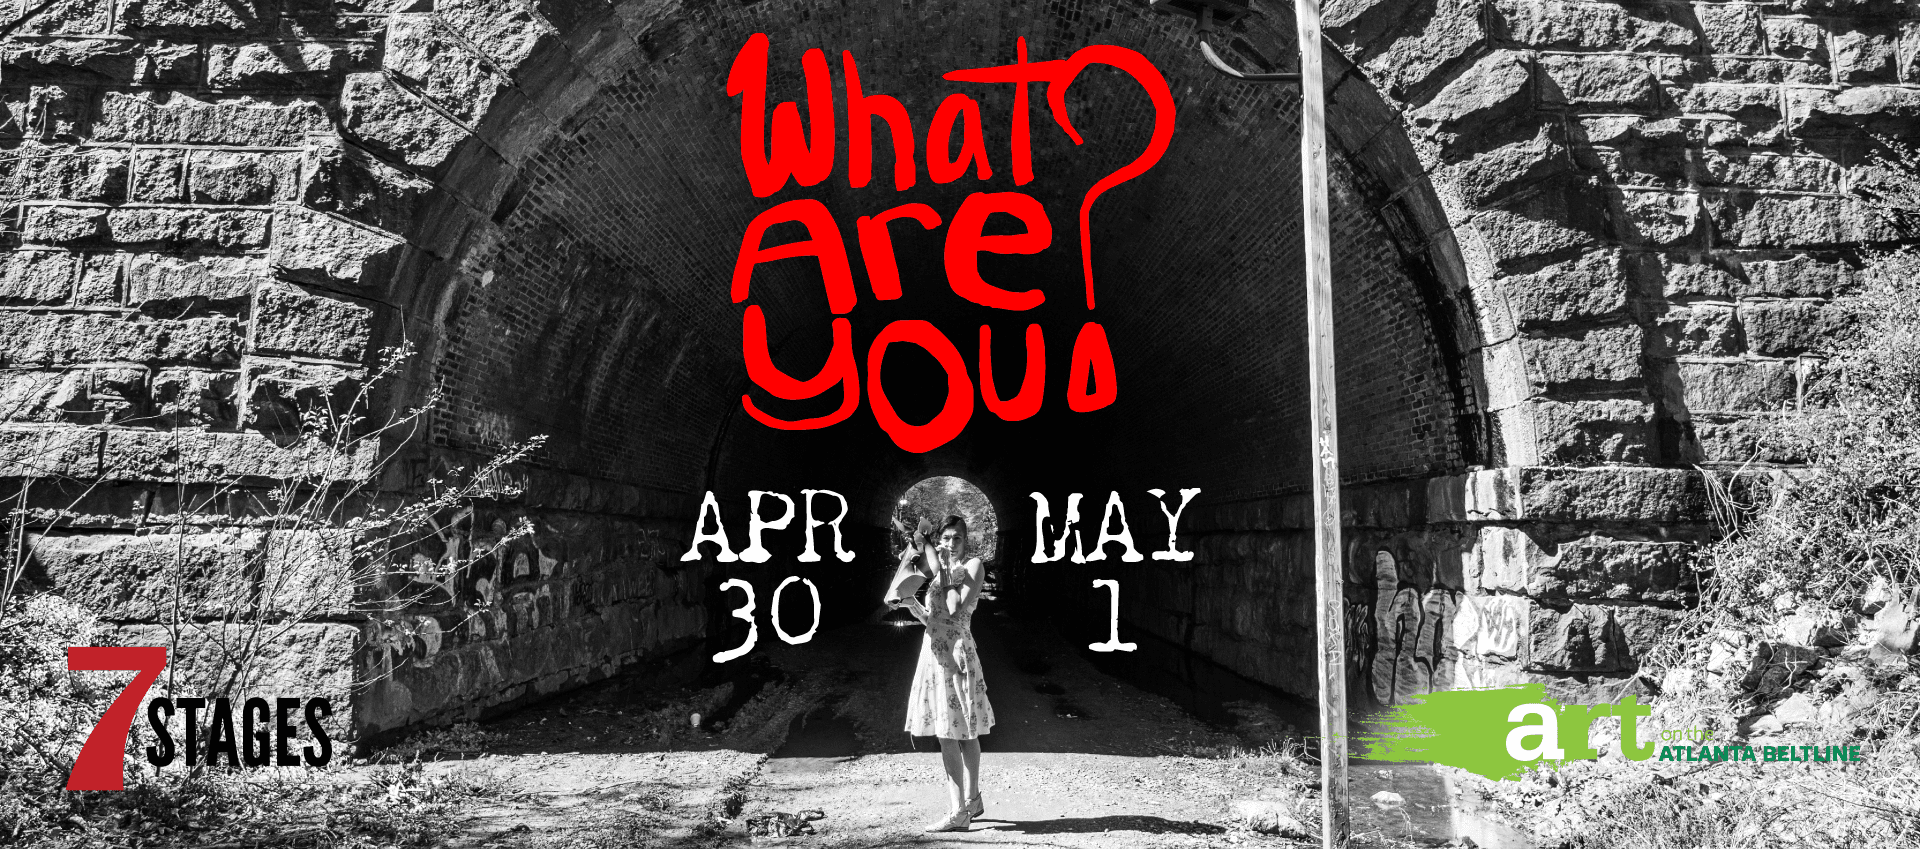 What Are You? April 30 and May 1. 7 Stages and Art on the Atlanta Beltline.